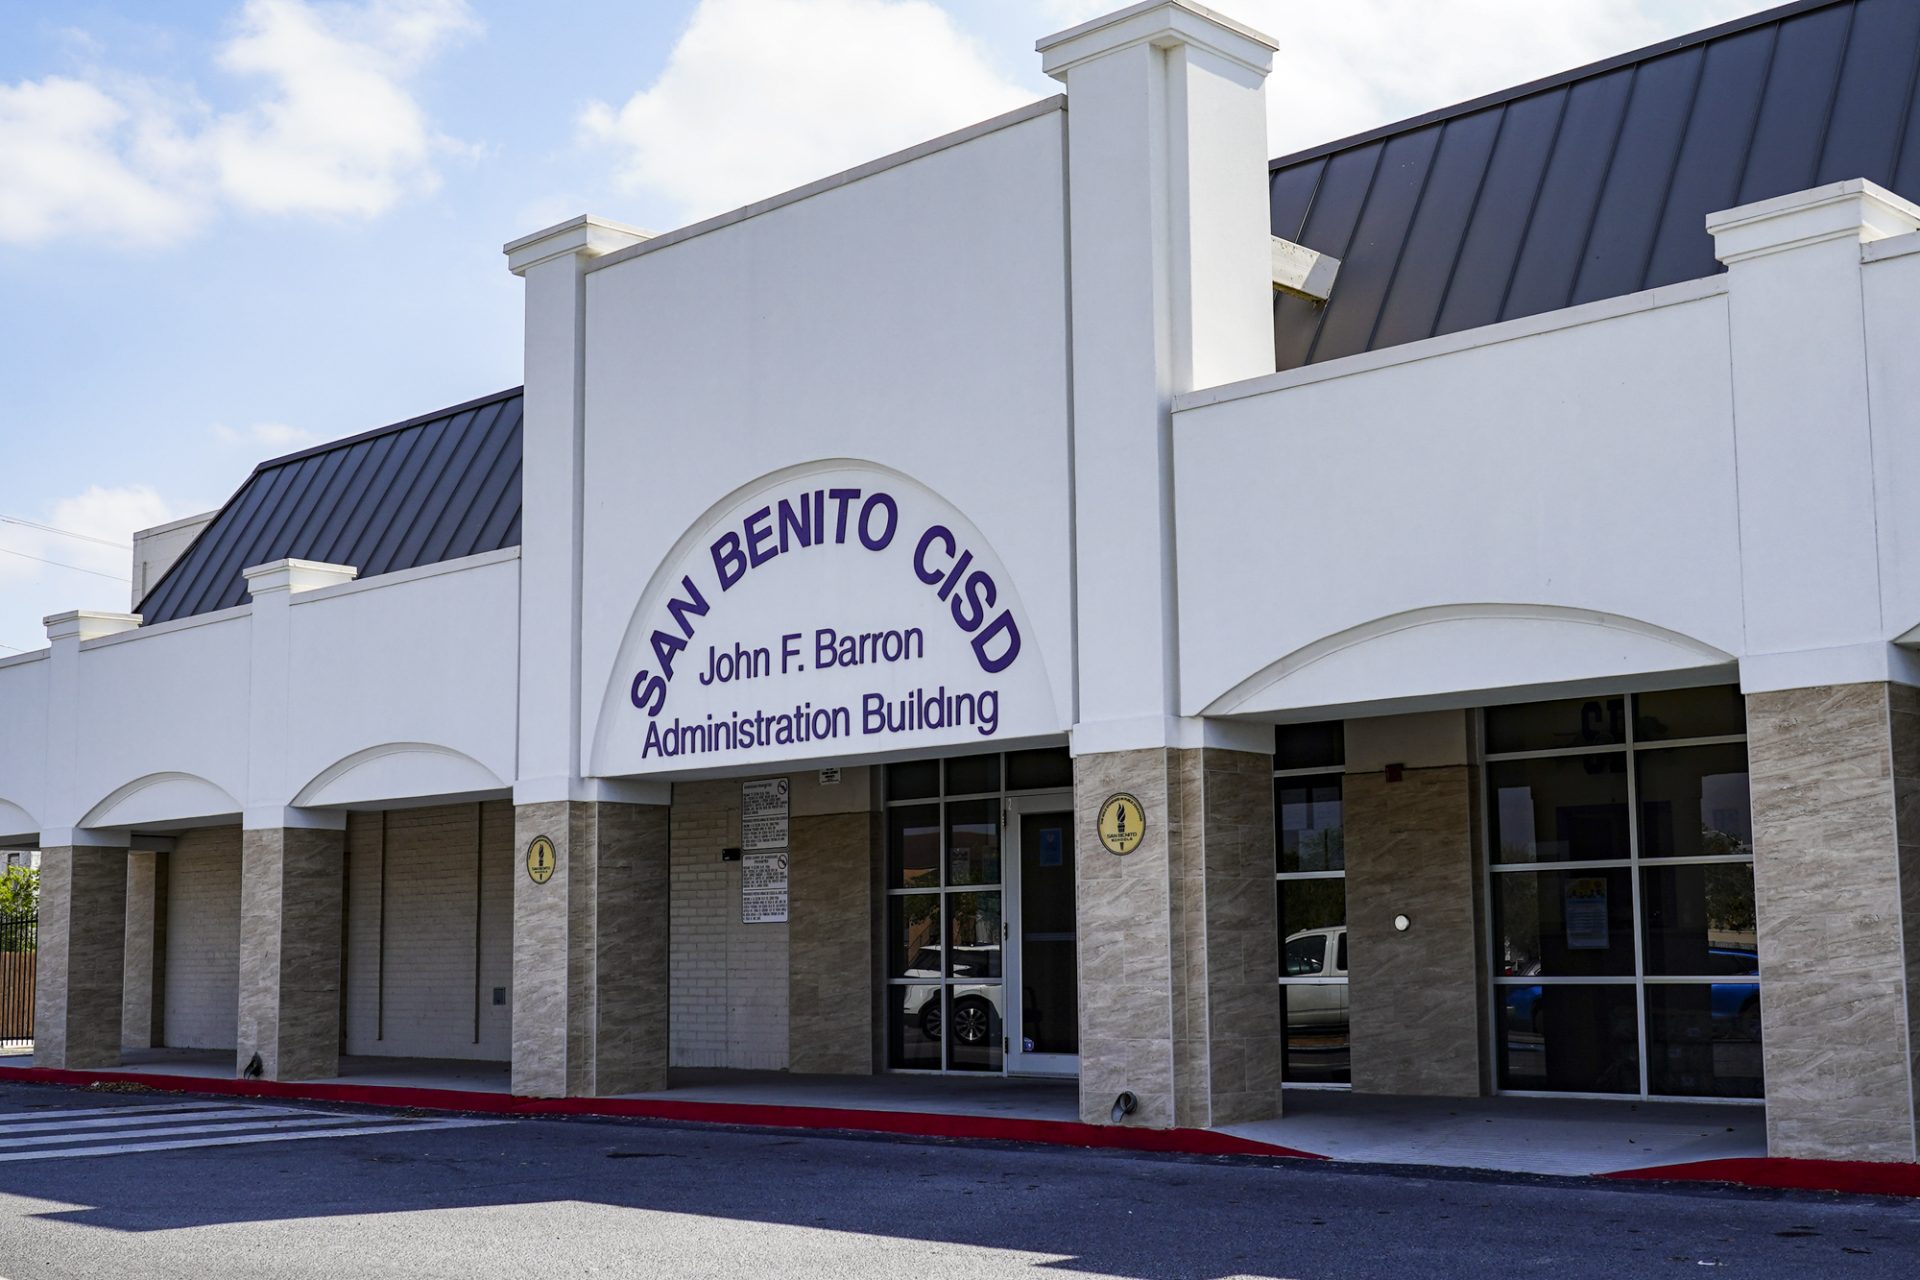 Reminder / Recordatorio  San Benito Consolidated Independent School  District